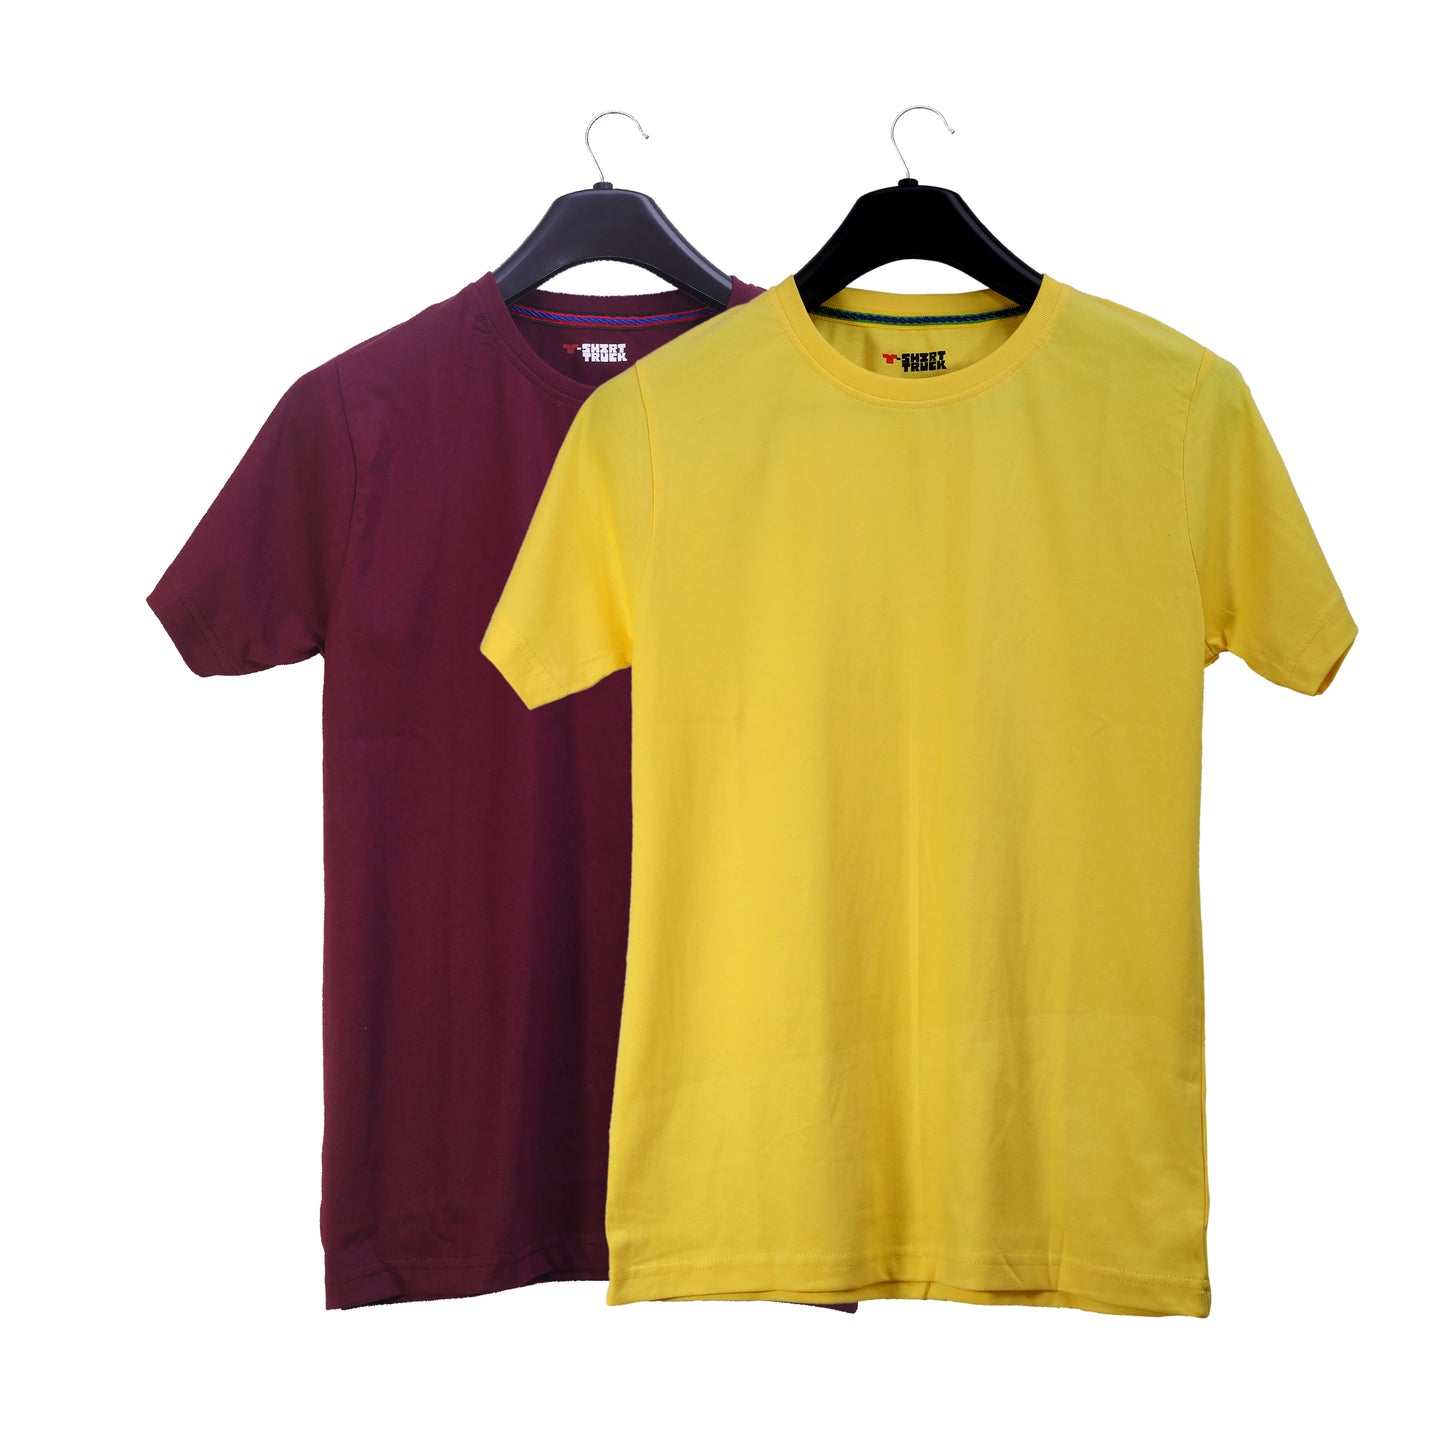 Unisex Round Neck Plain Solid Combo Pack of 2 T-shirts Maroon & Yellow